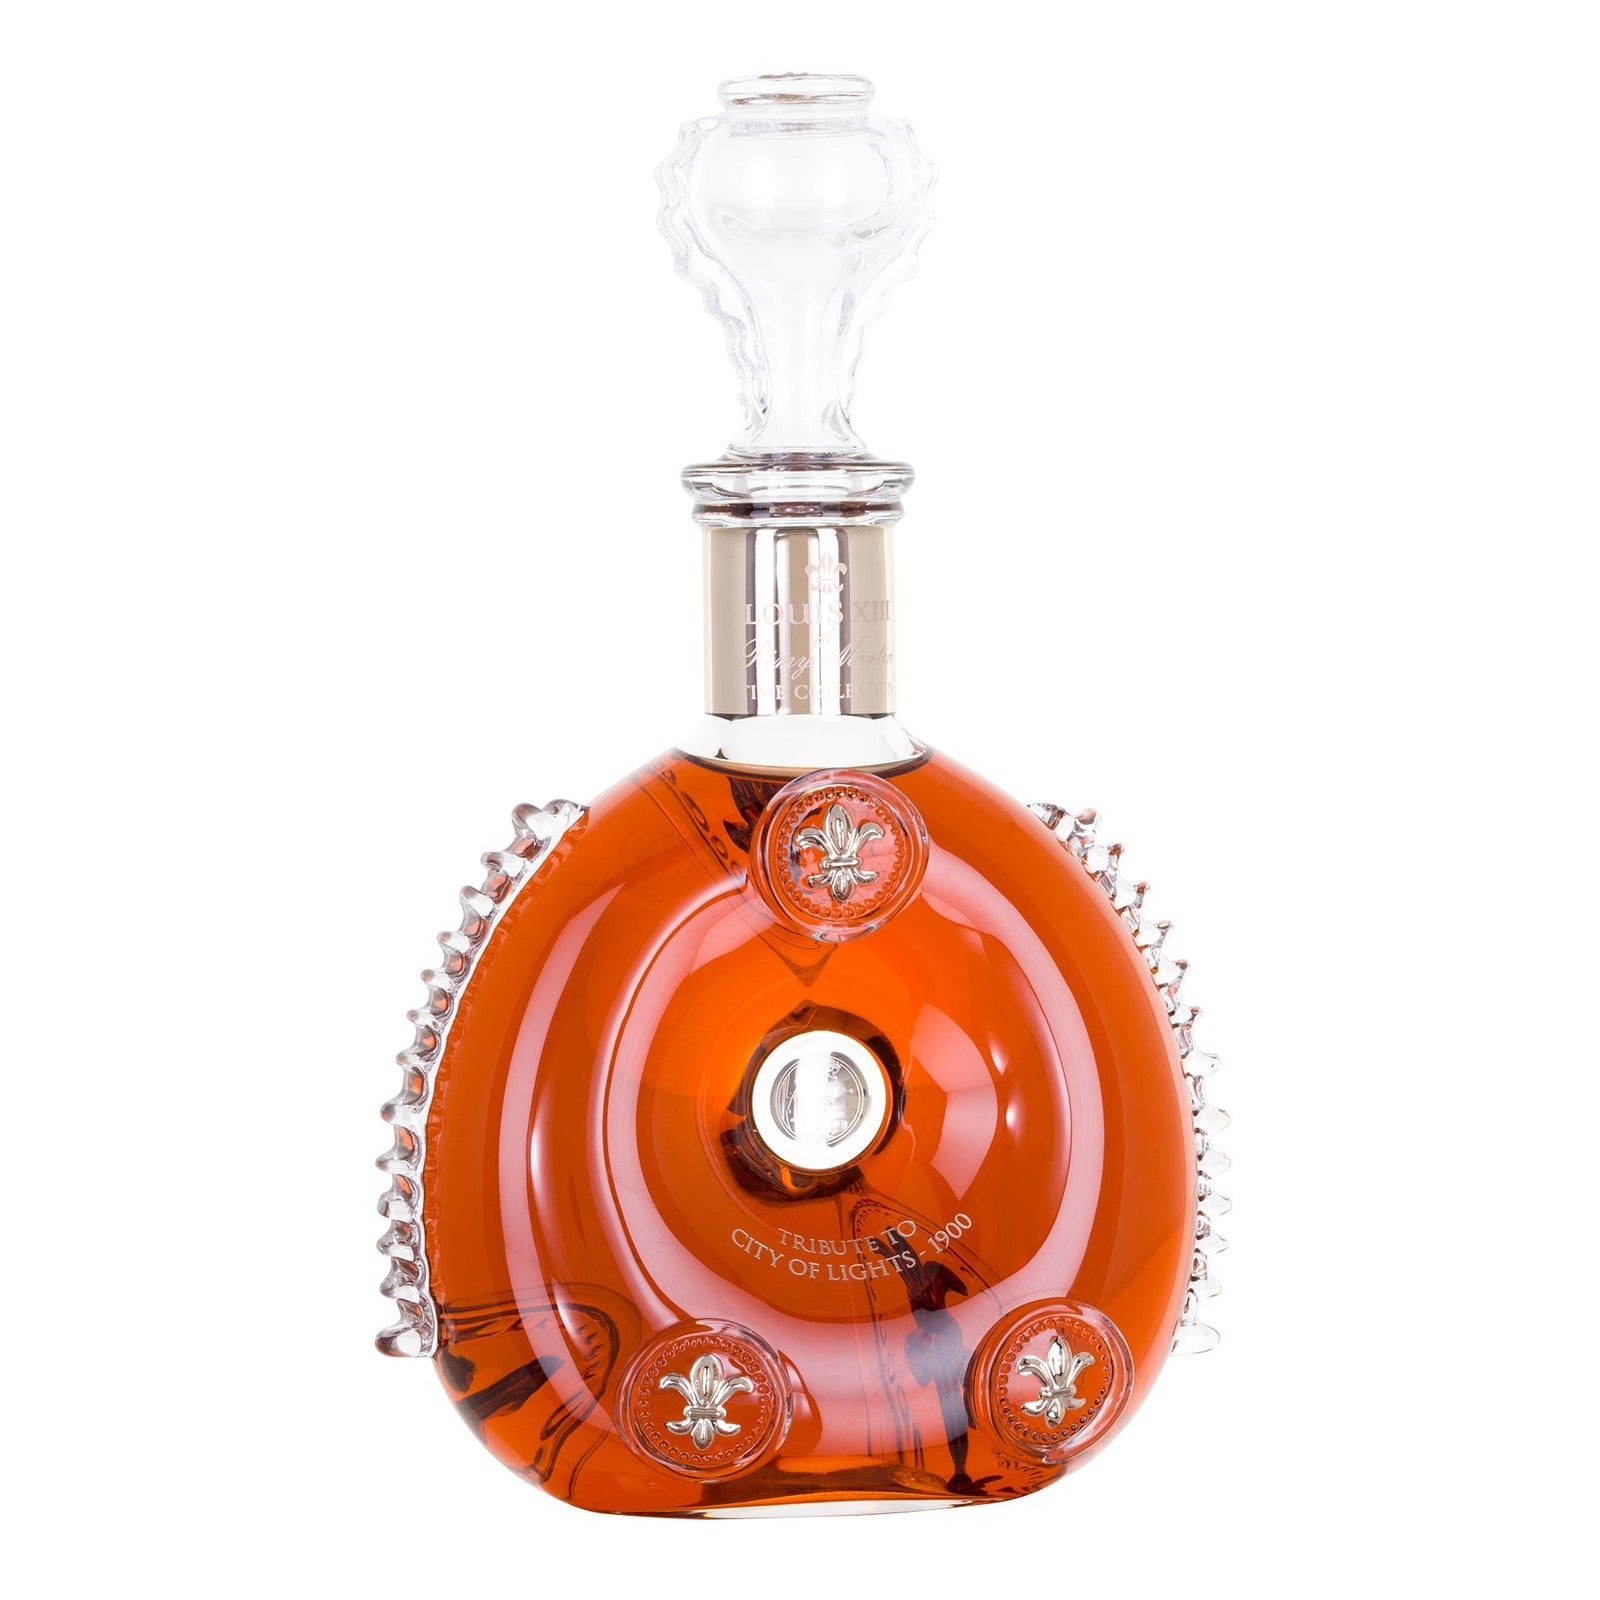 A packshot of LOUIS XIII City of Lights 1900 decanter on a white background